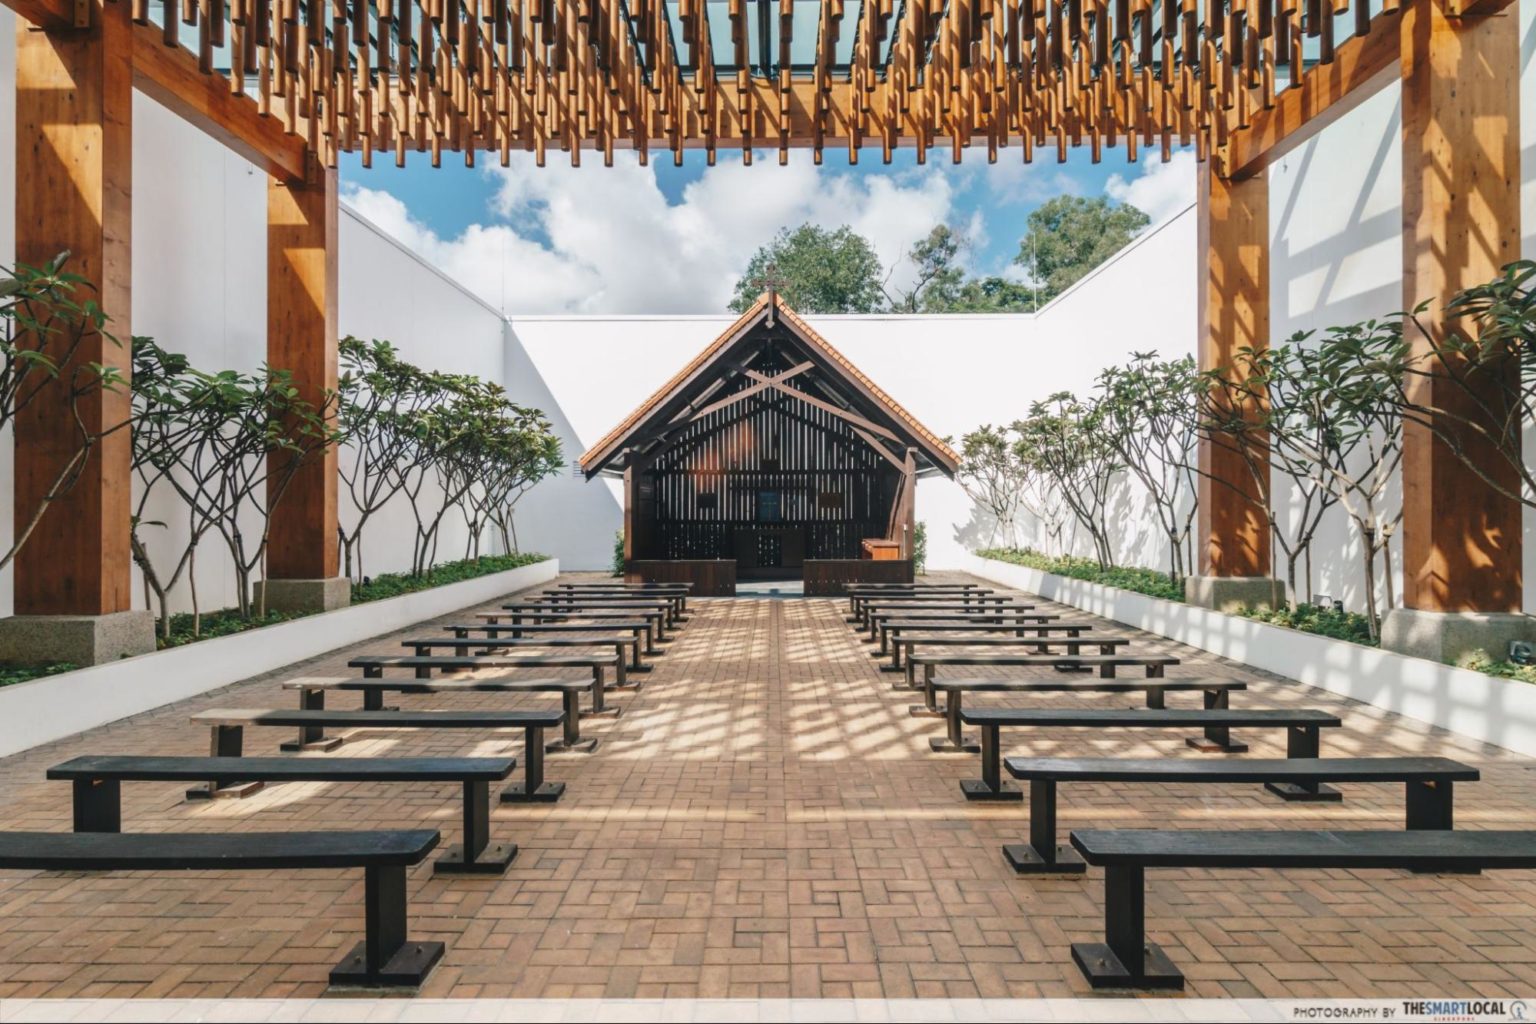 Things to do in June 2021 - Changi Chapel & Museum